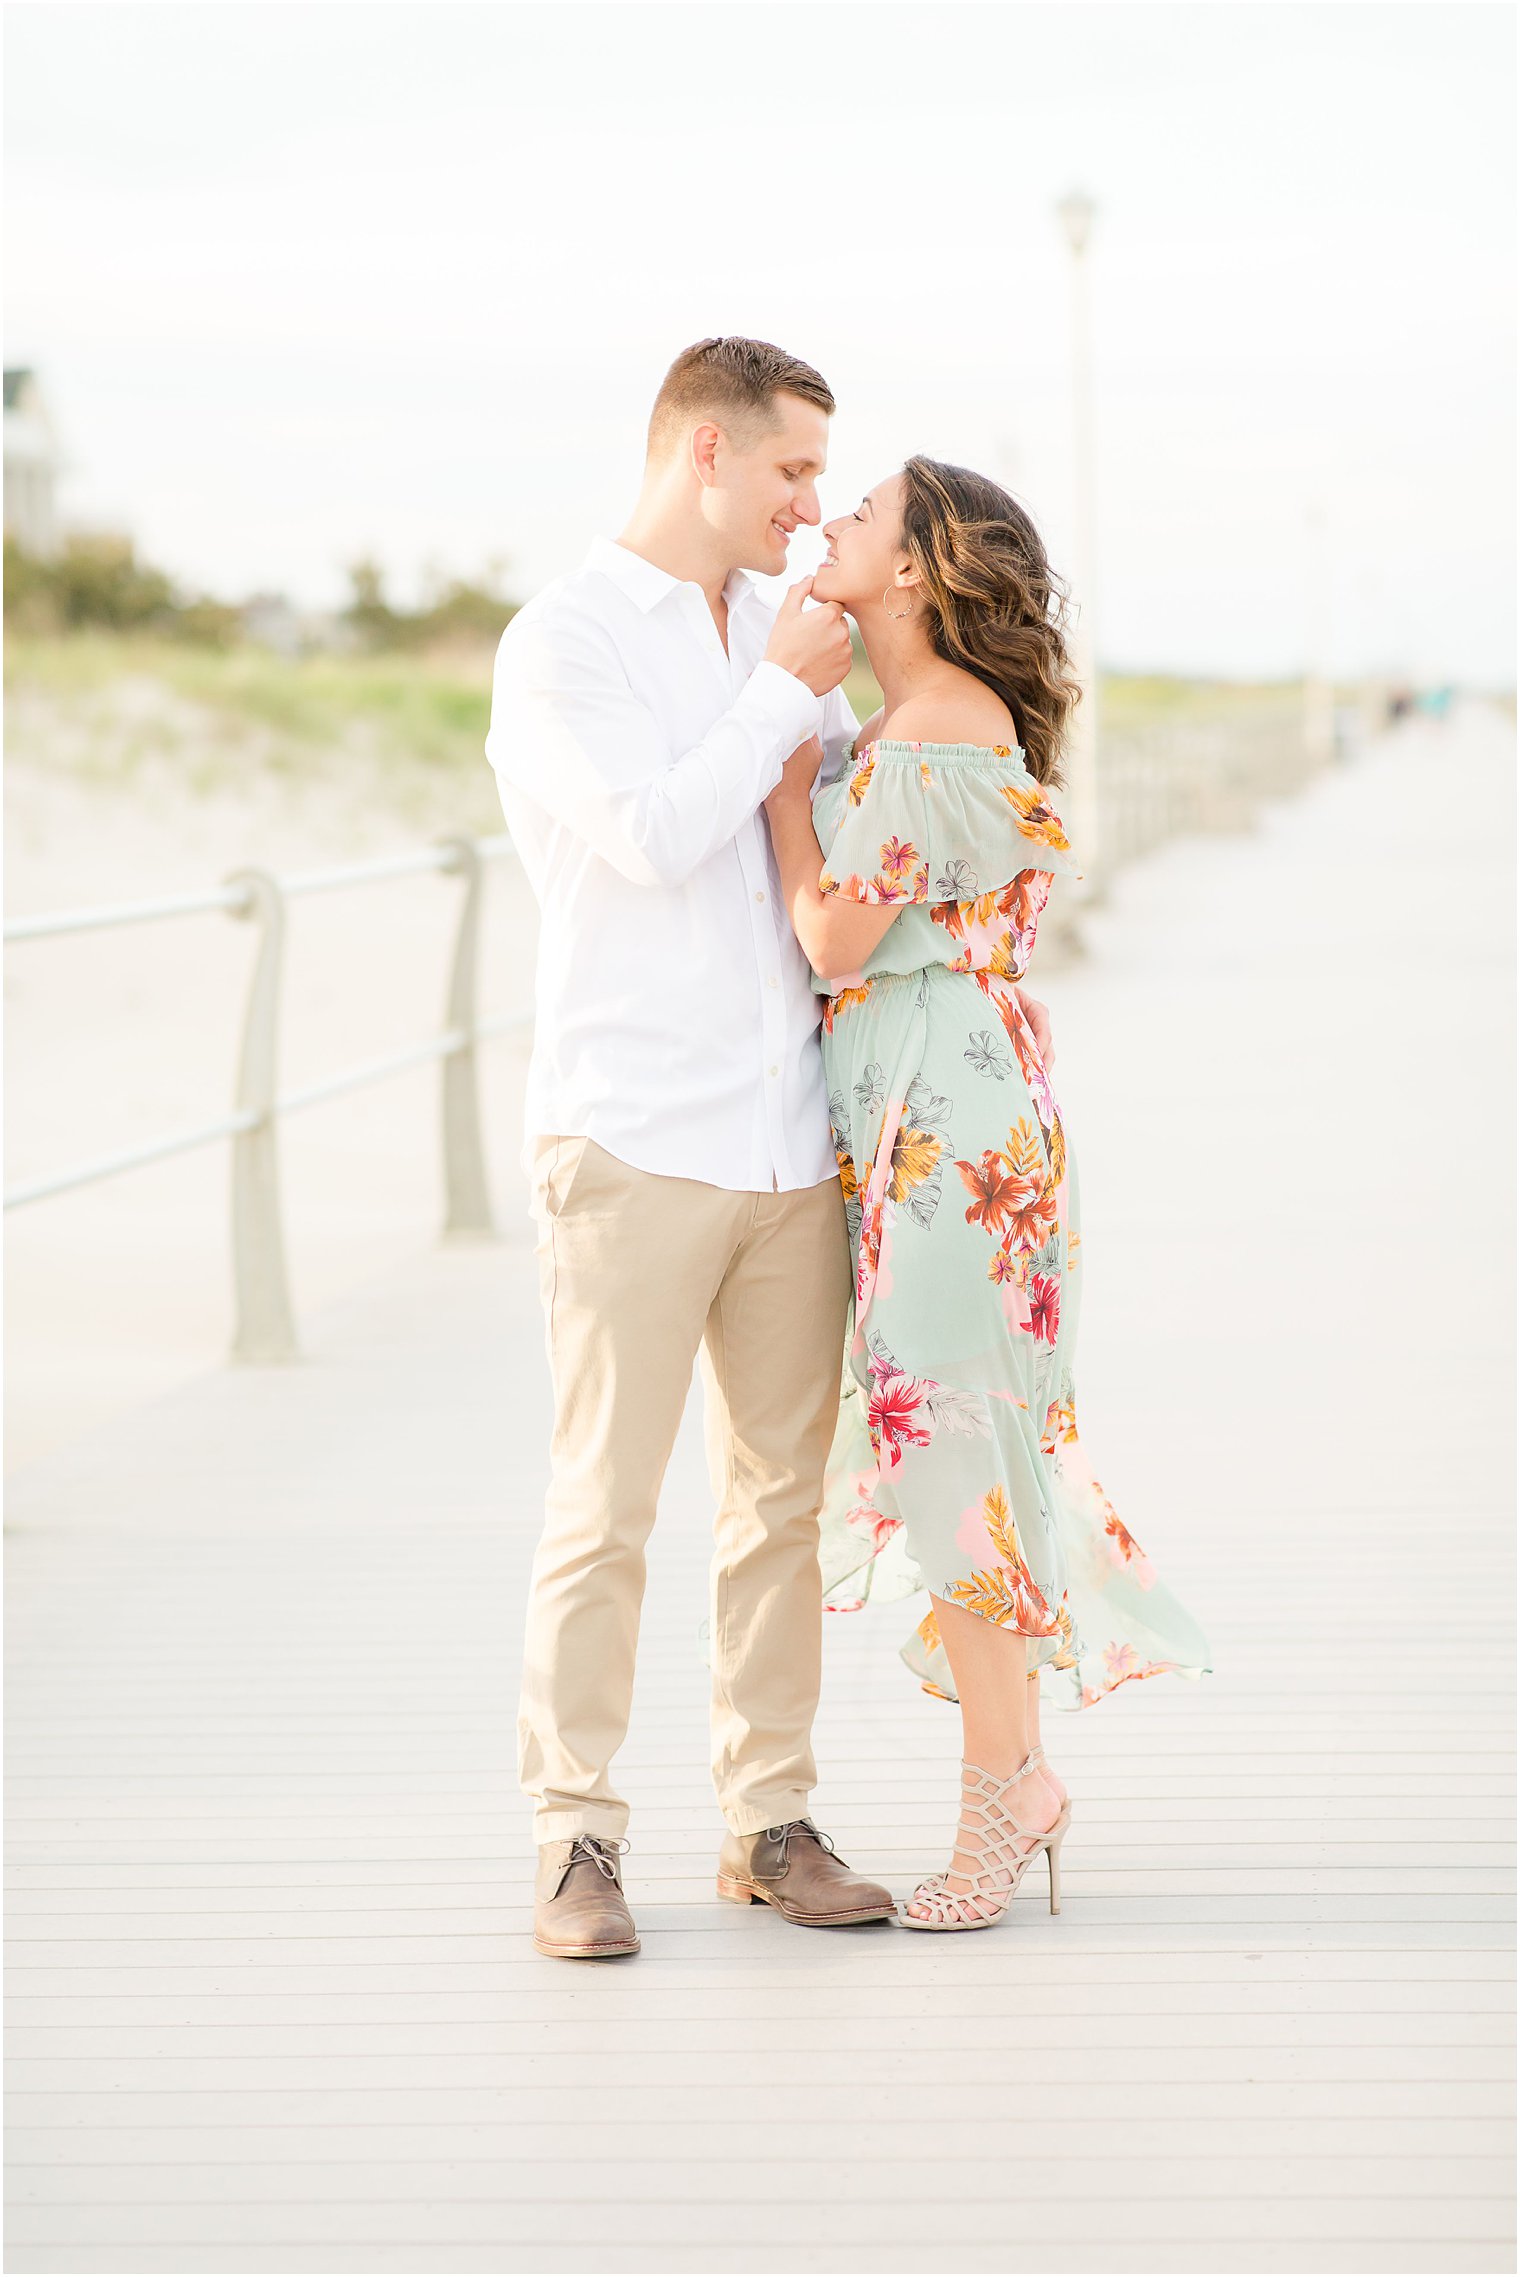 tips for what to wear for engagement photos